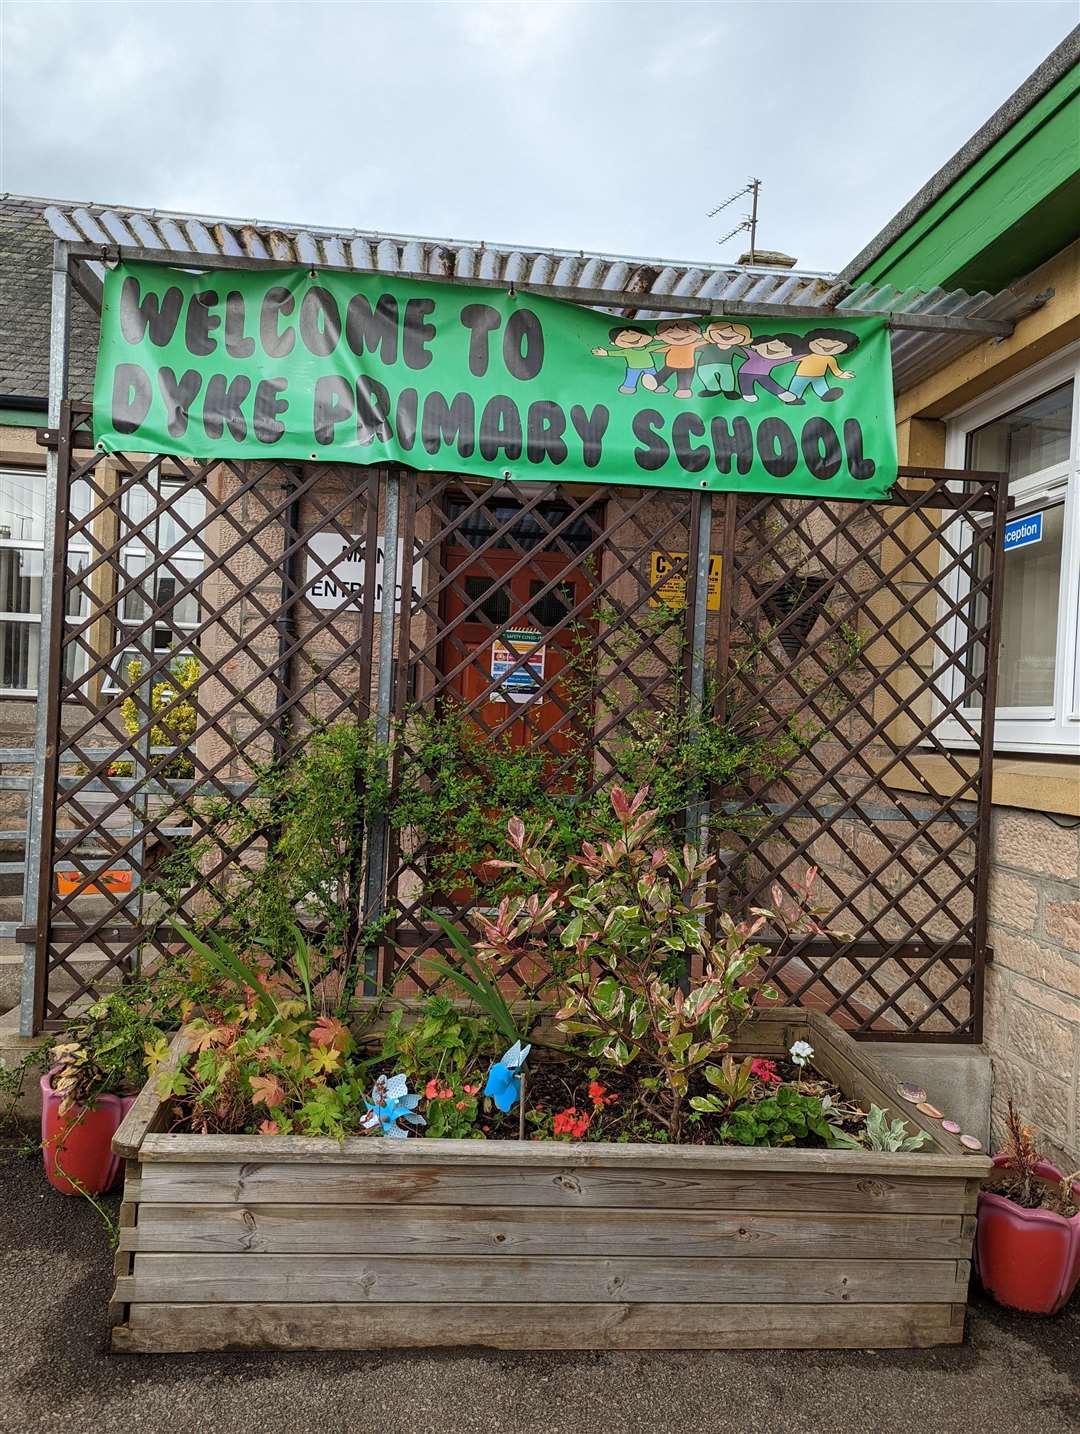 One of the growing tubs at Dyke Primary that is thriving under the community’s care.